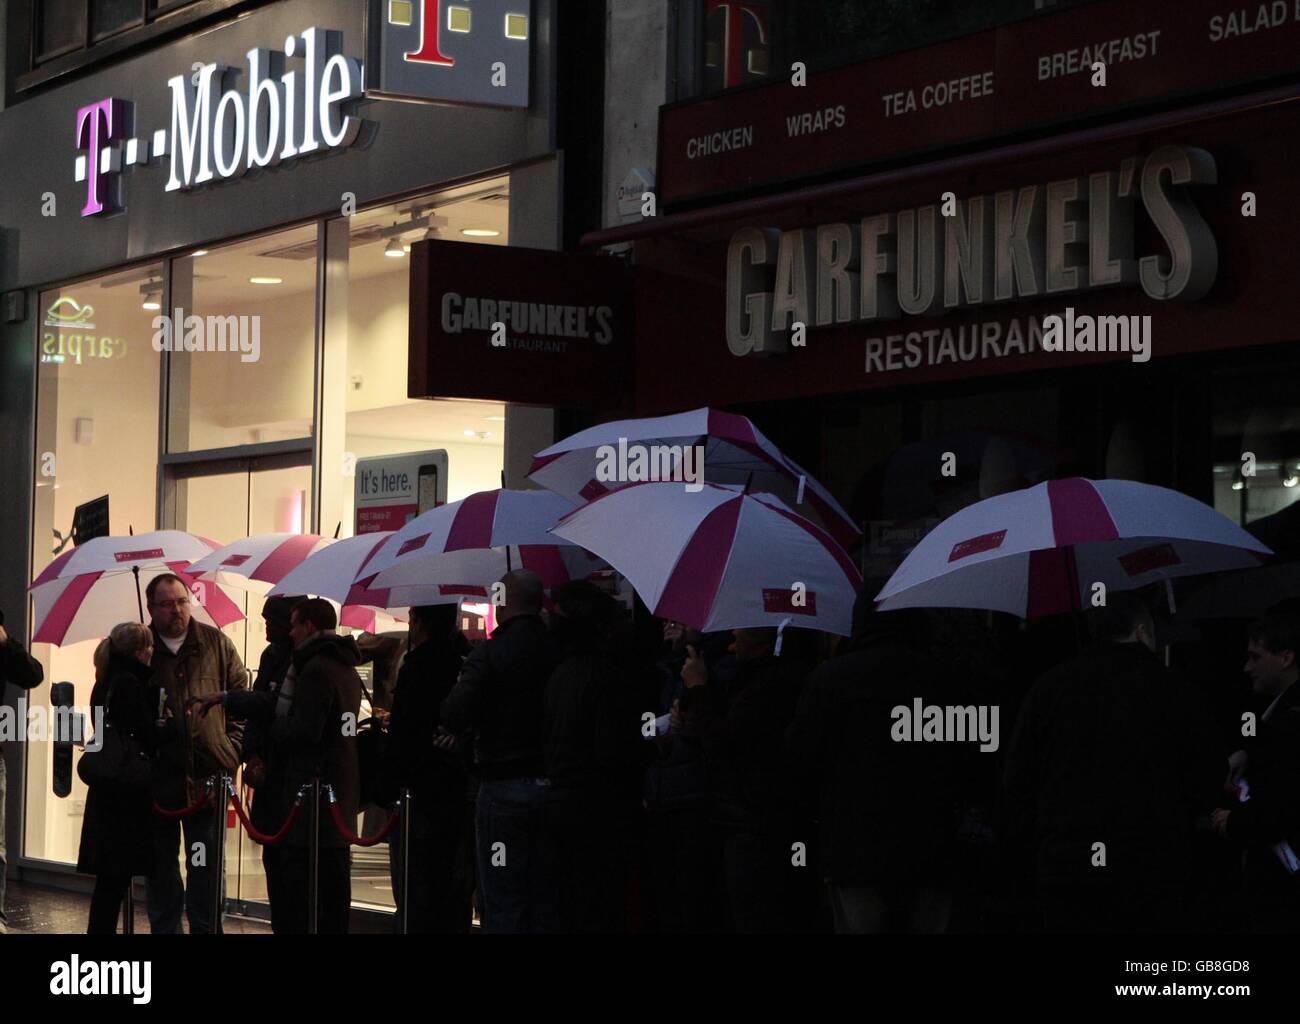 Shoppers queue outside the T-Mobile store on Oxford Street, London in a bid to become the first people in the UK to own the new T-Mobile G1 mobile phone as it goes on sale for the first time today in the UK. Stock Photo